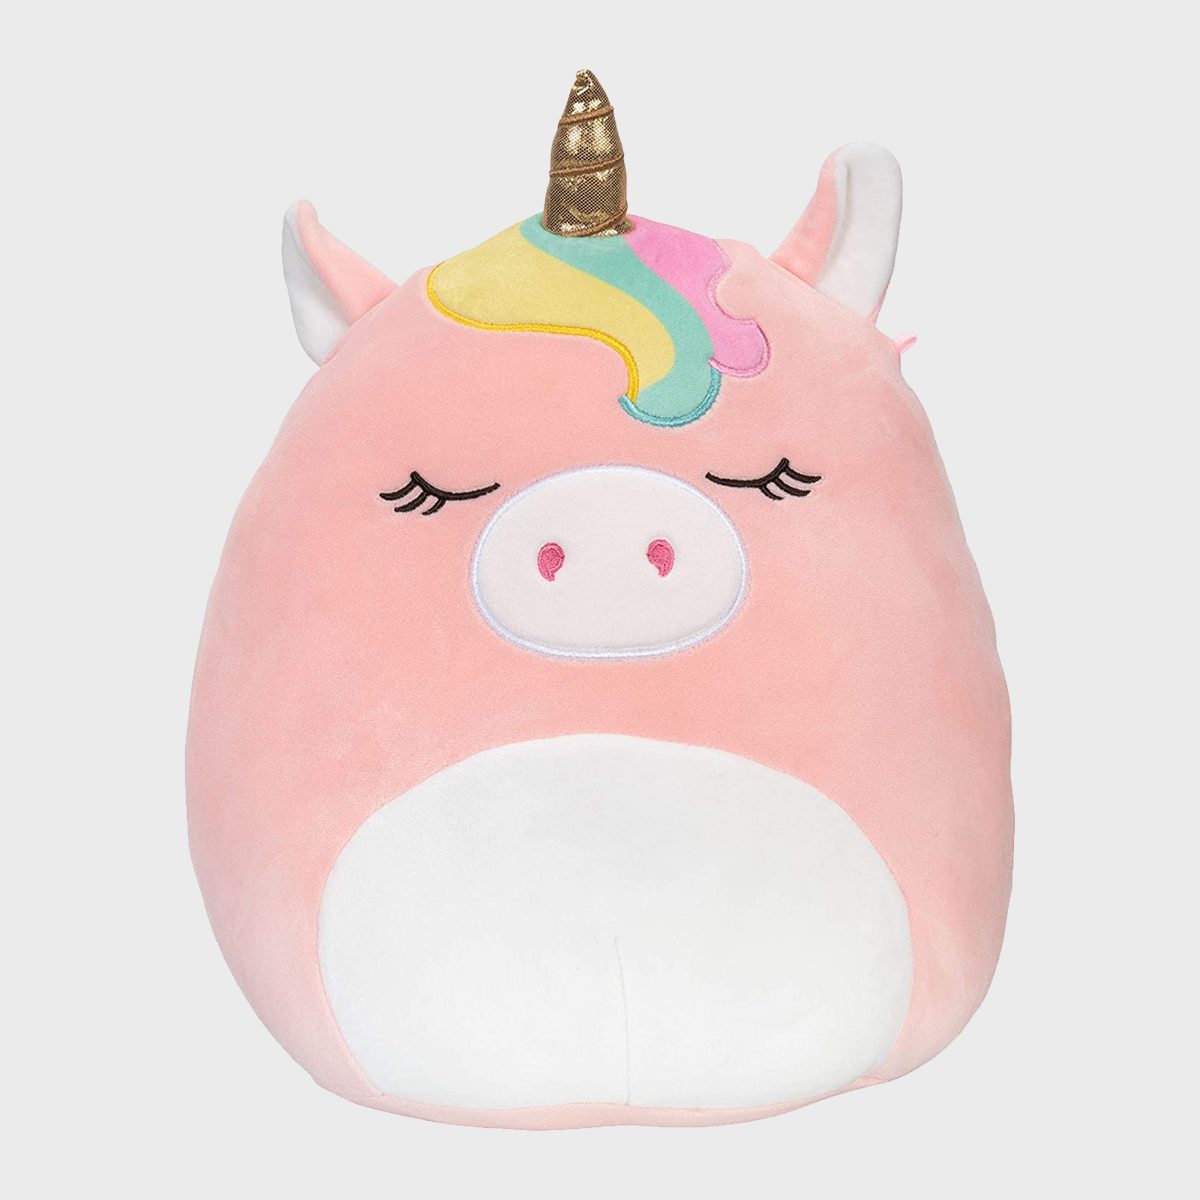 <p>You can't go wrong with a Squishmallow! The popular squishy toys are available in every animal and food under the sun, but this unicorn is perfect for Valentine's Day.</p> <p class="listicle-page__cta-button-shop"><a class="shop-btn" href="https://www.amazon.com/Squishmallow-Official-Kellytoy-Unicorn-Ultrasoft/dp/B08G1WCP44/">Shop Now</a></p>